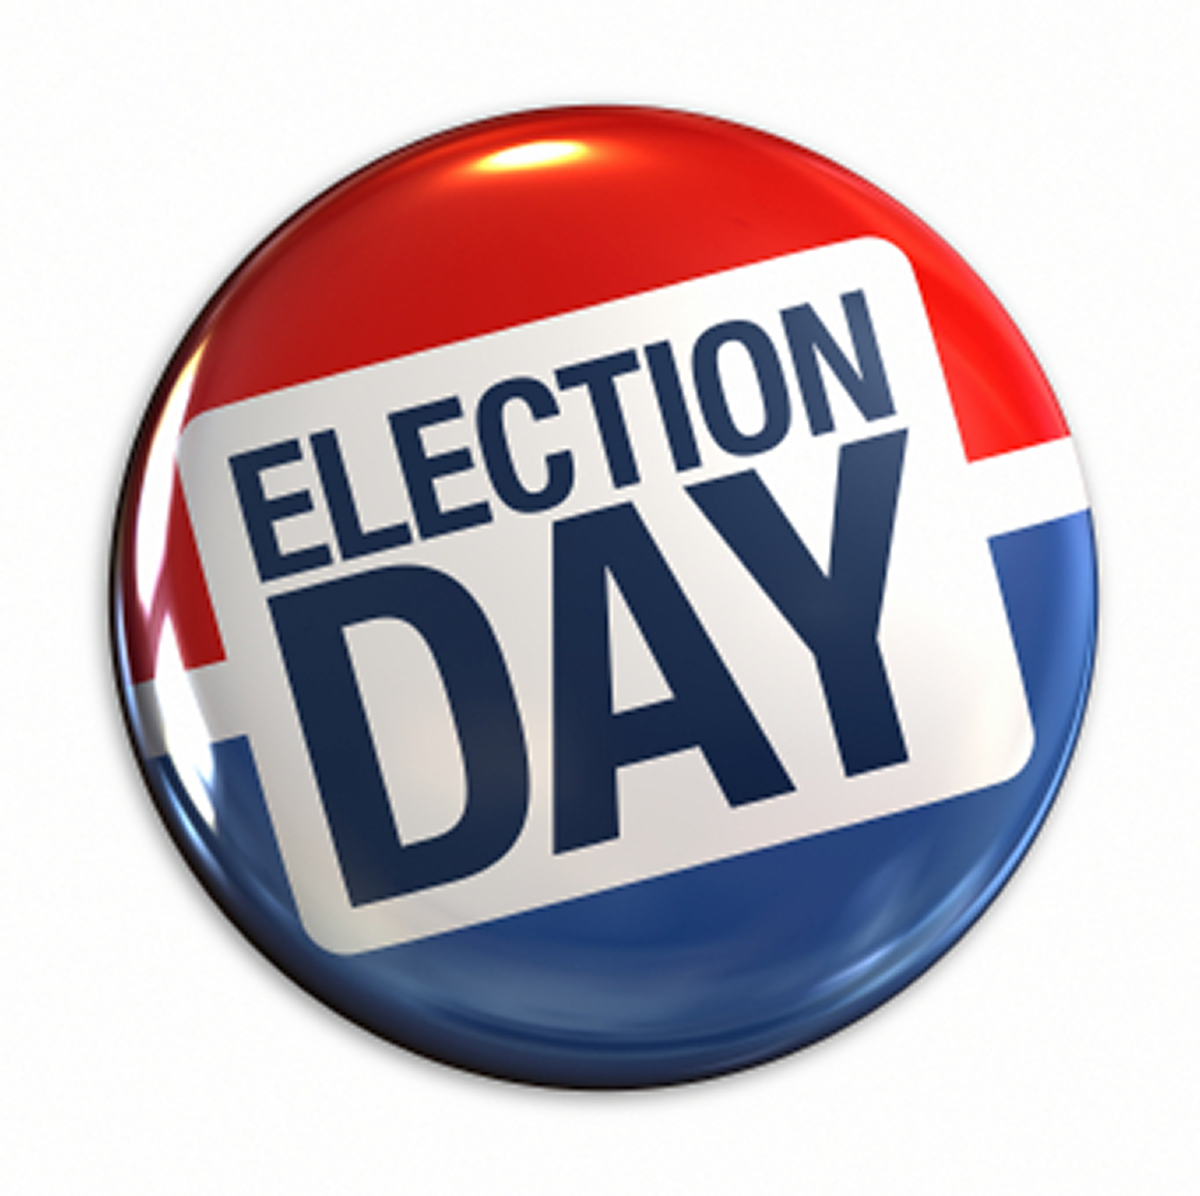 Election Day Clip Art   Beautiful Scenery Photography